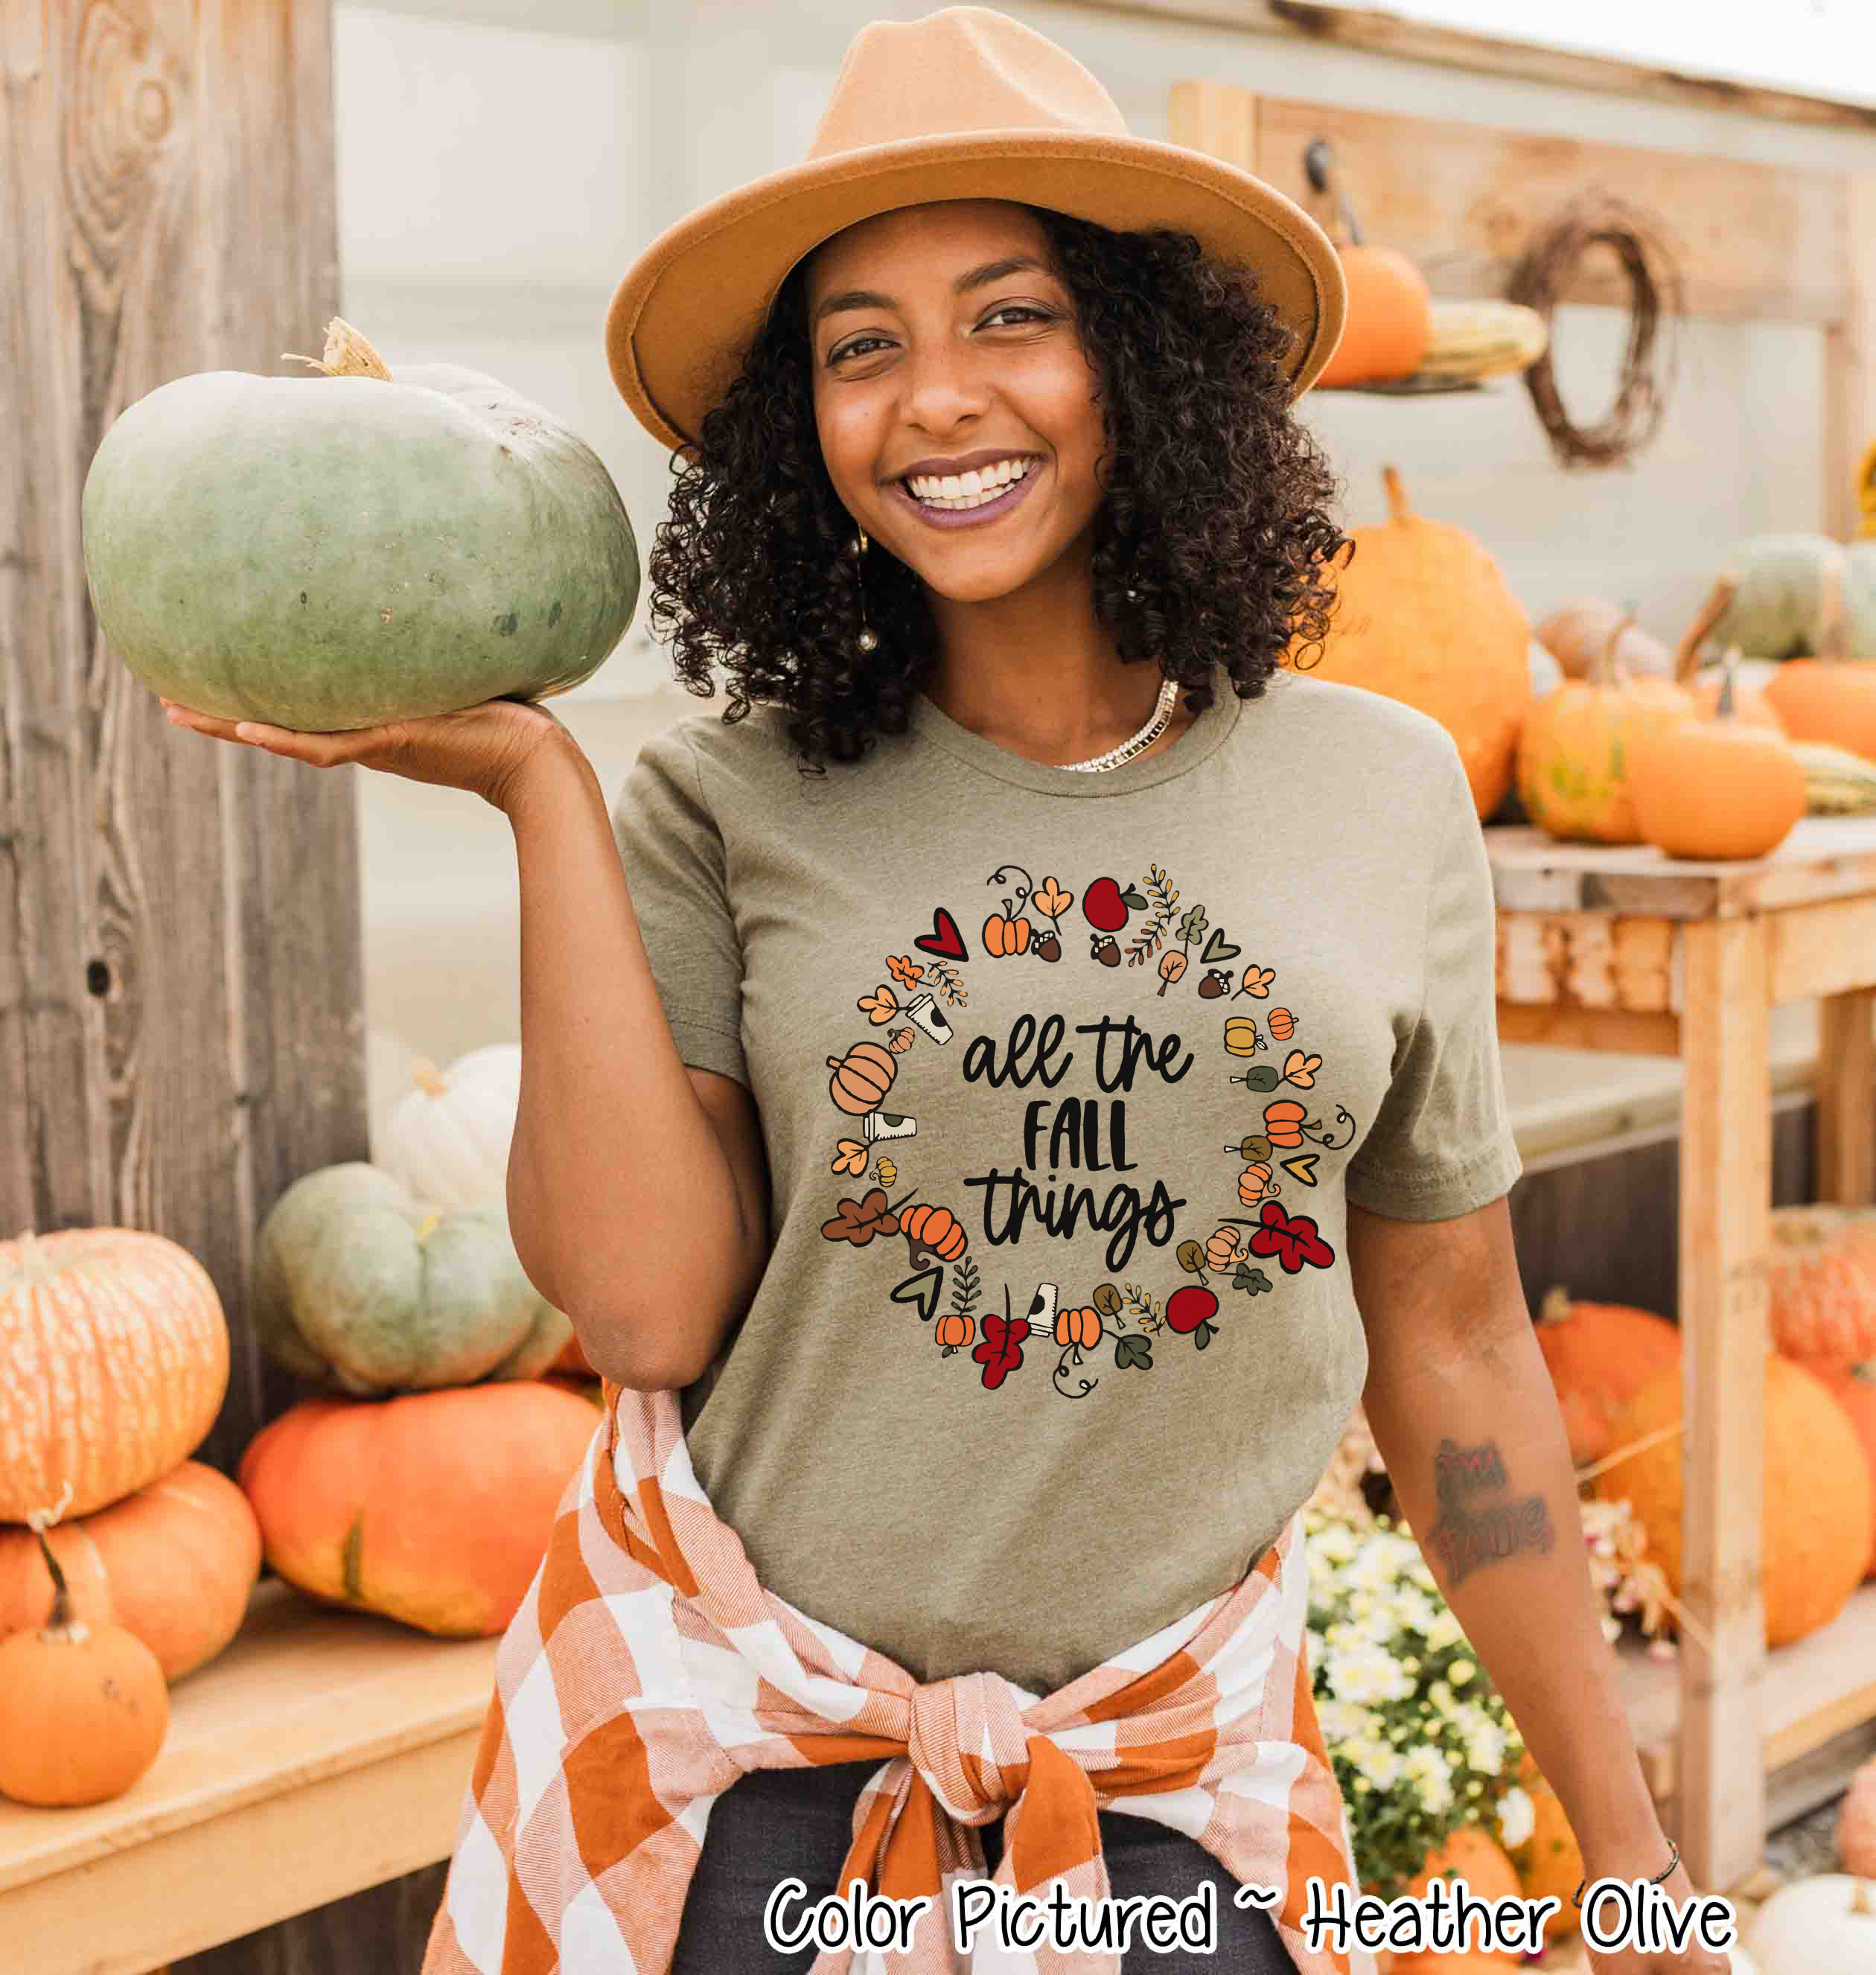 All The Fall Things Icon Tee